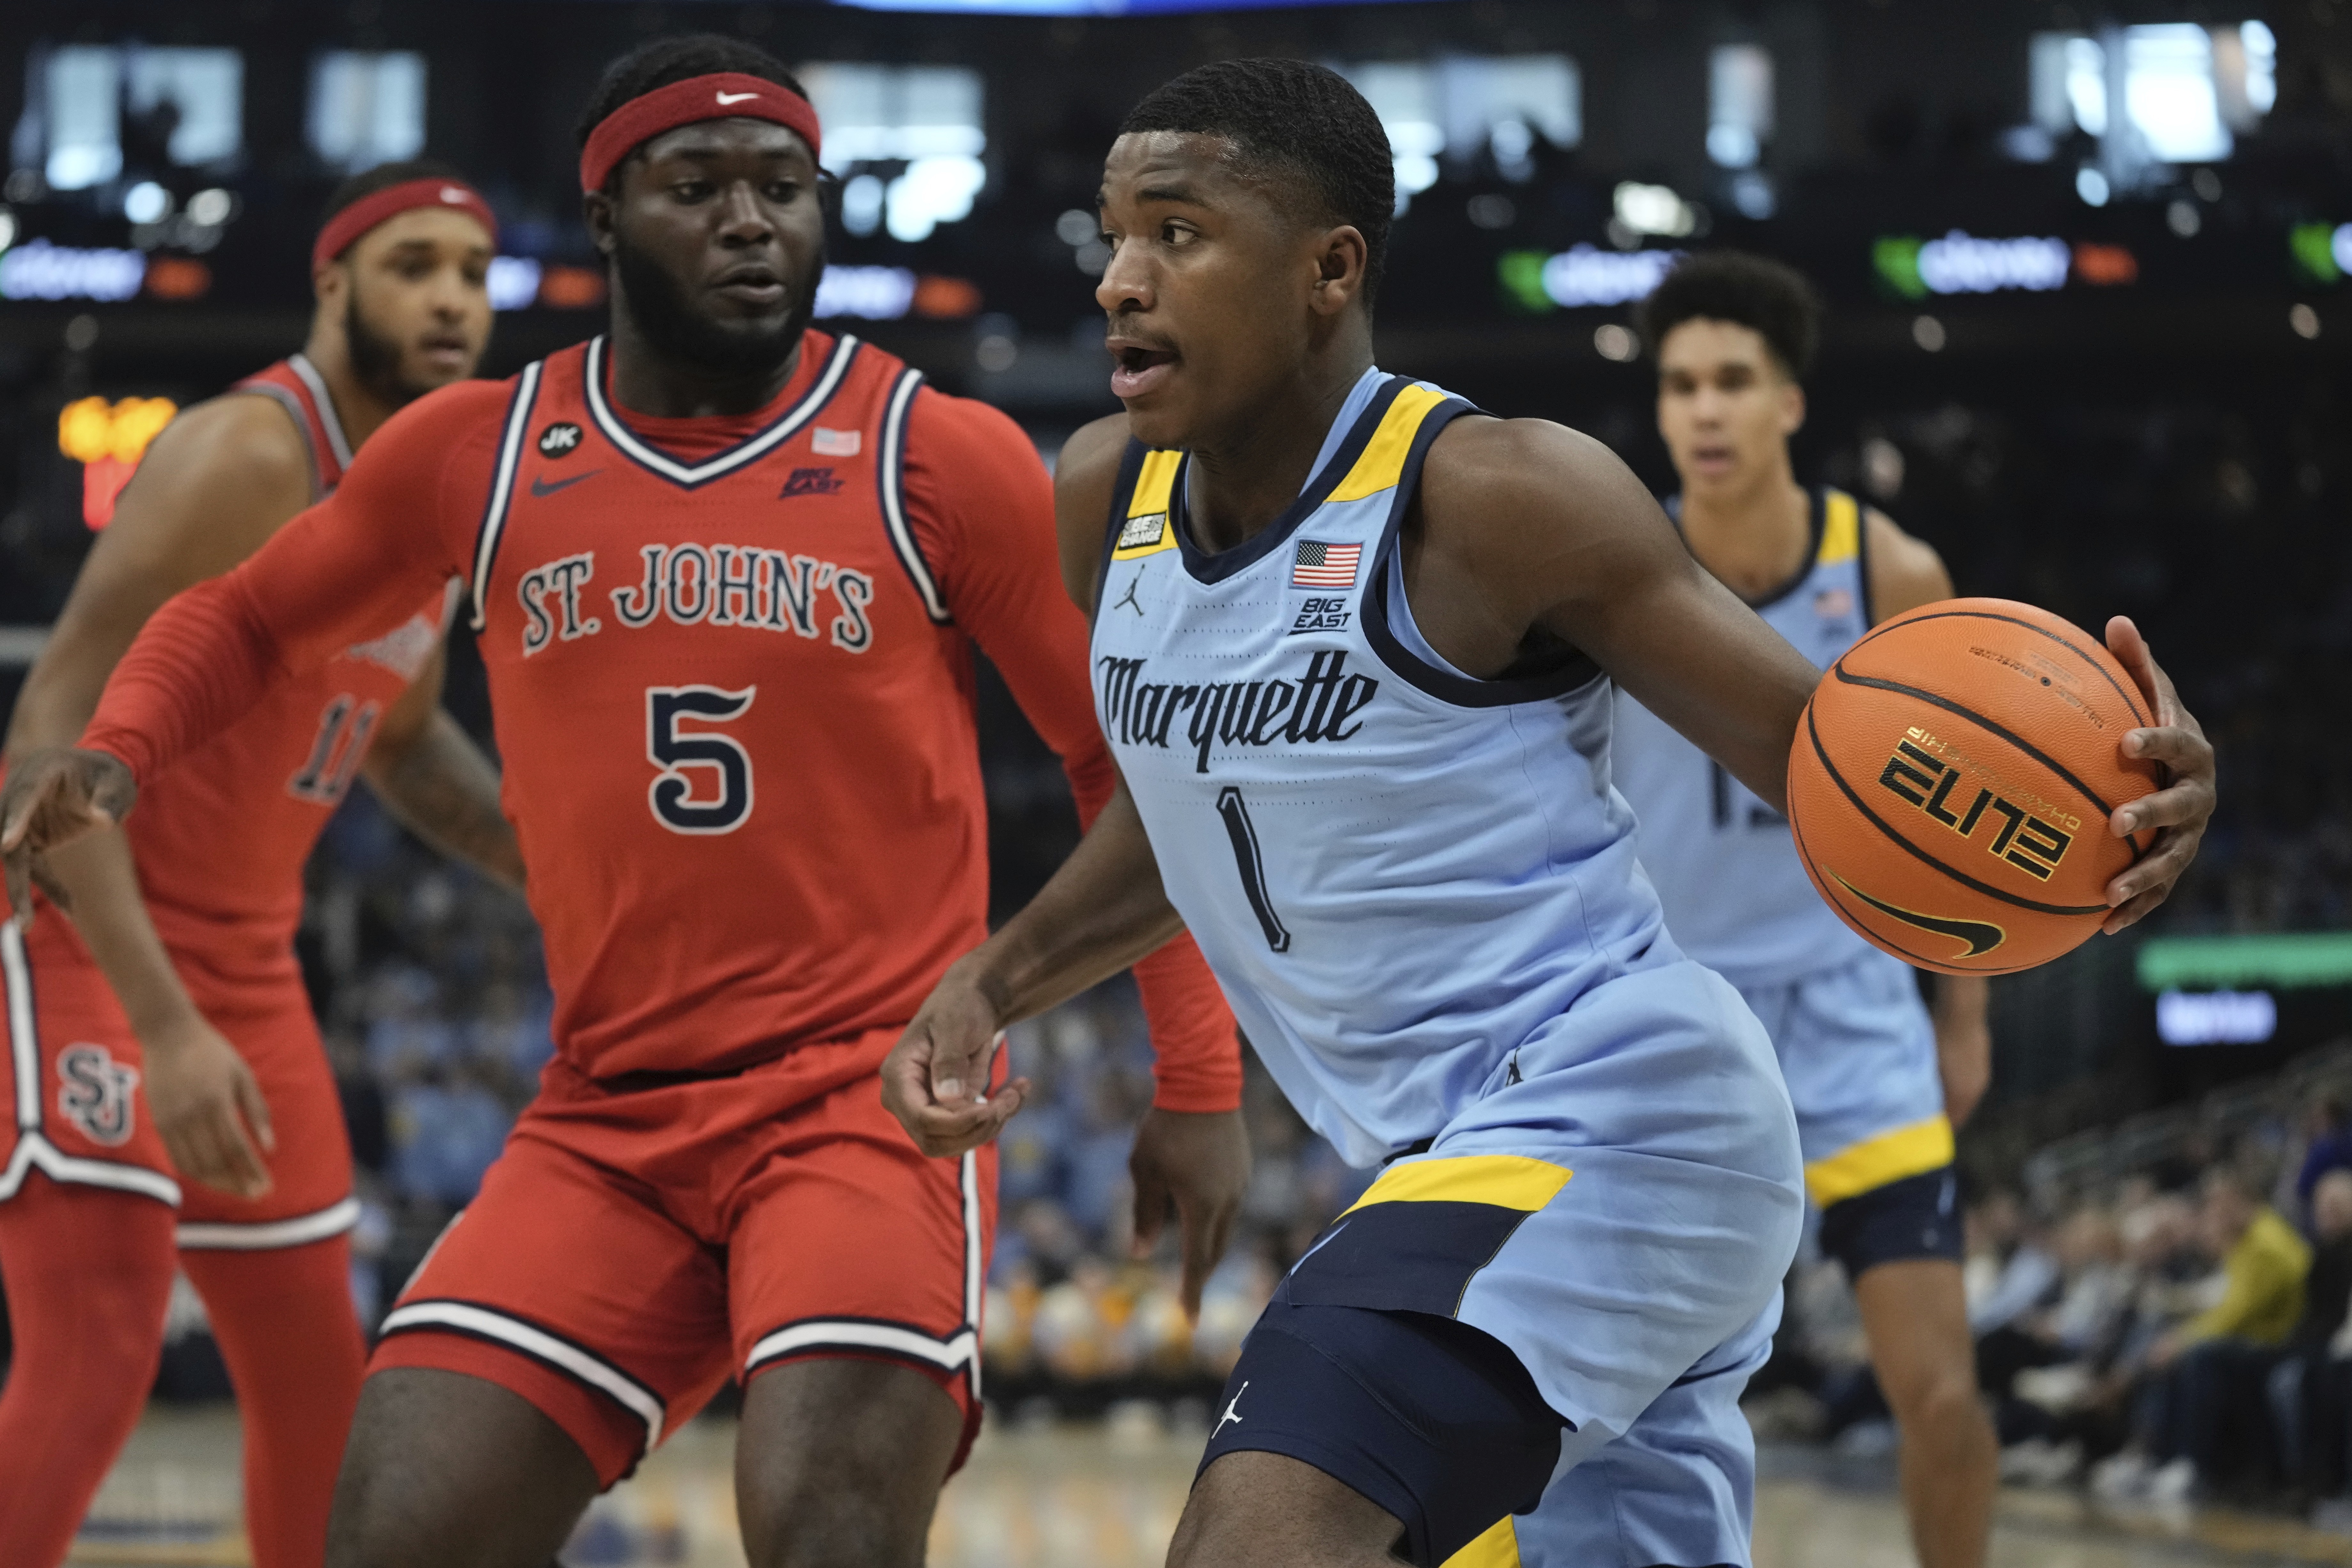 Marquette will miss what Anderson could have been